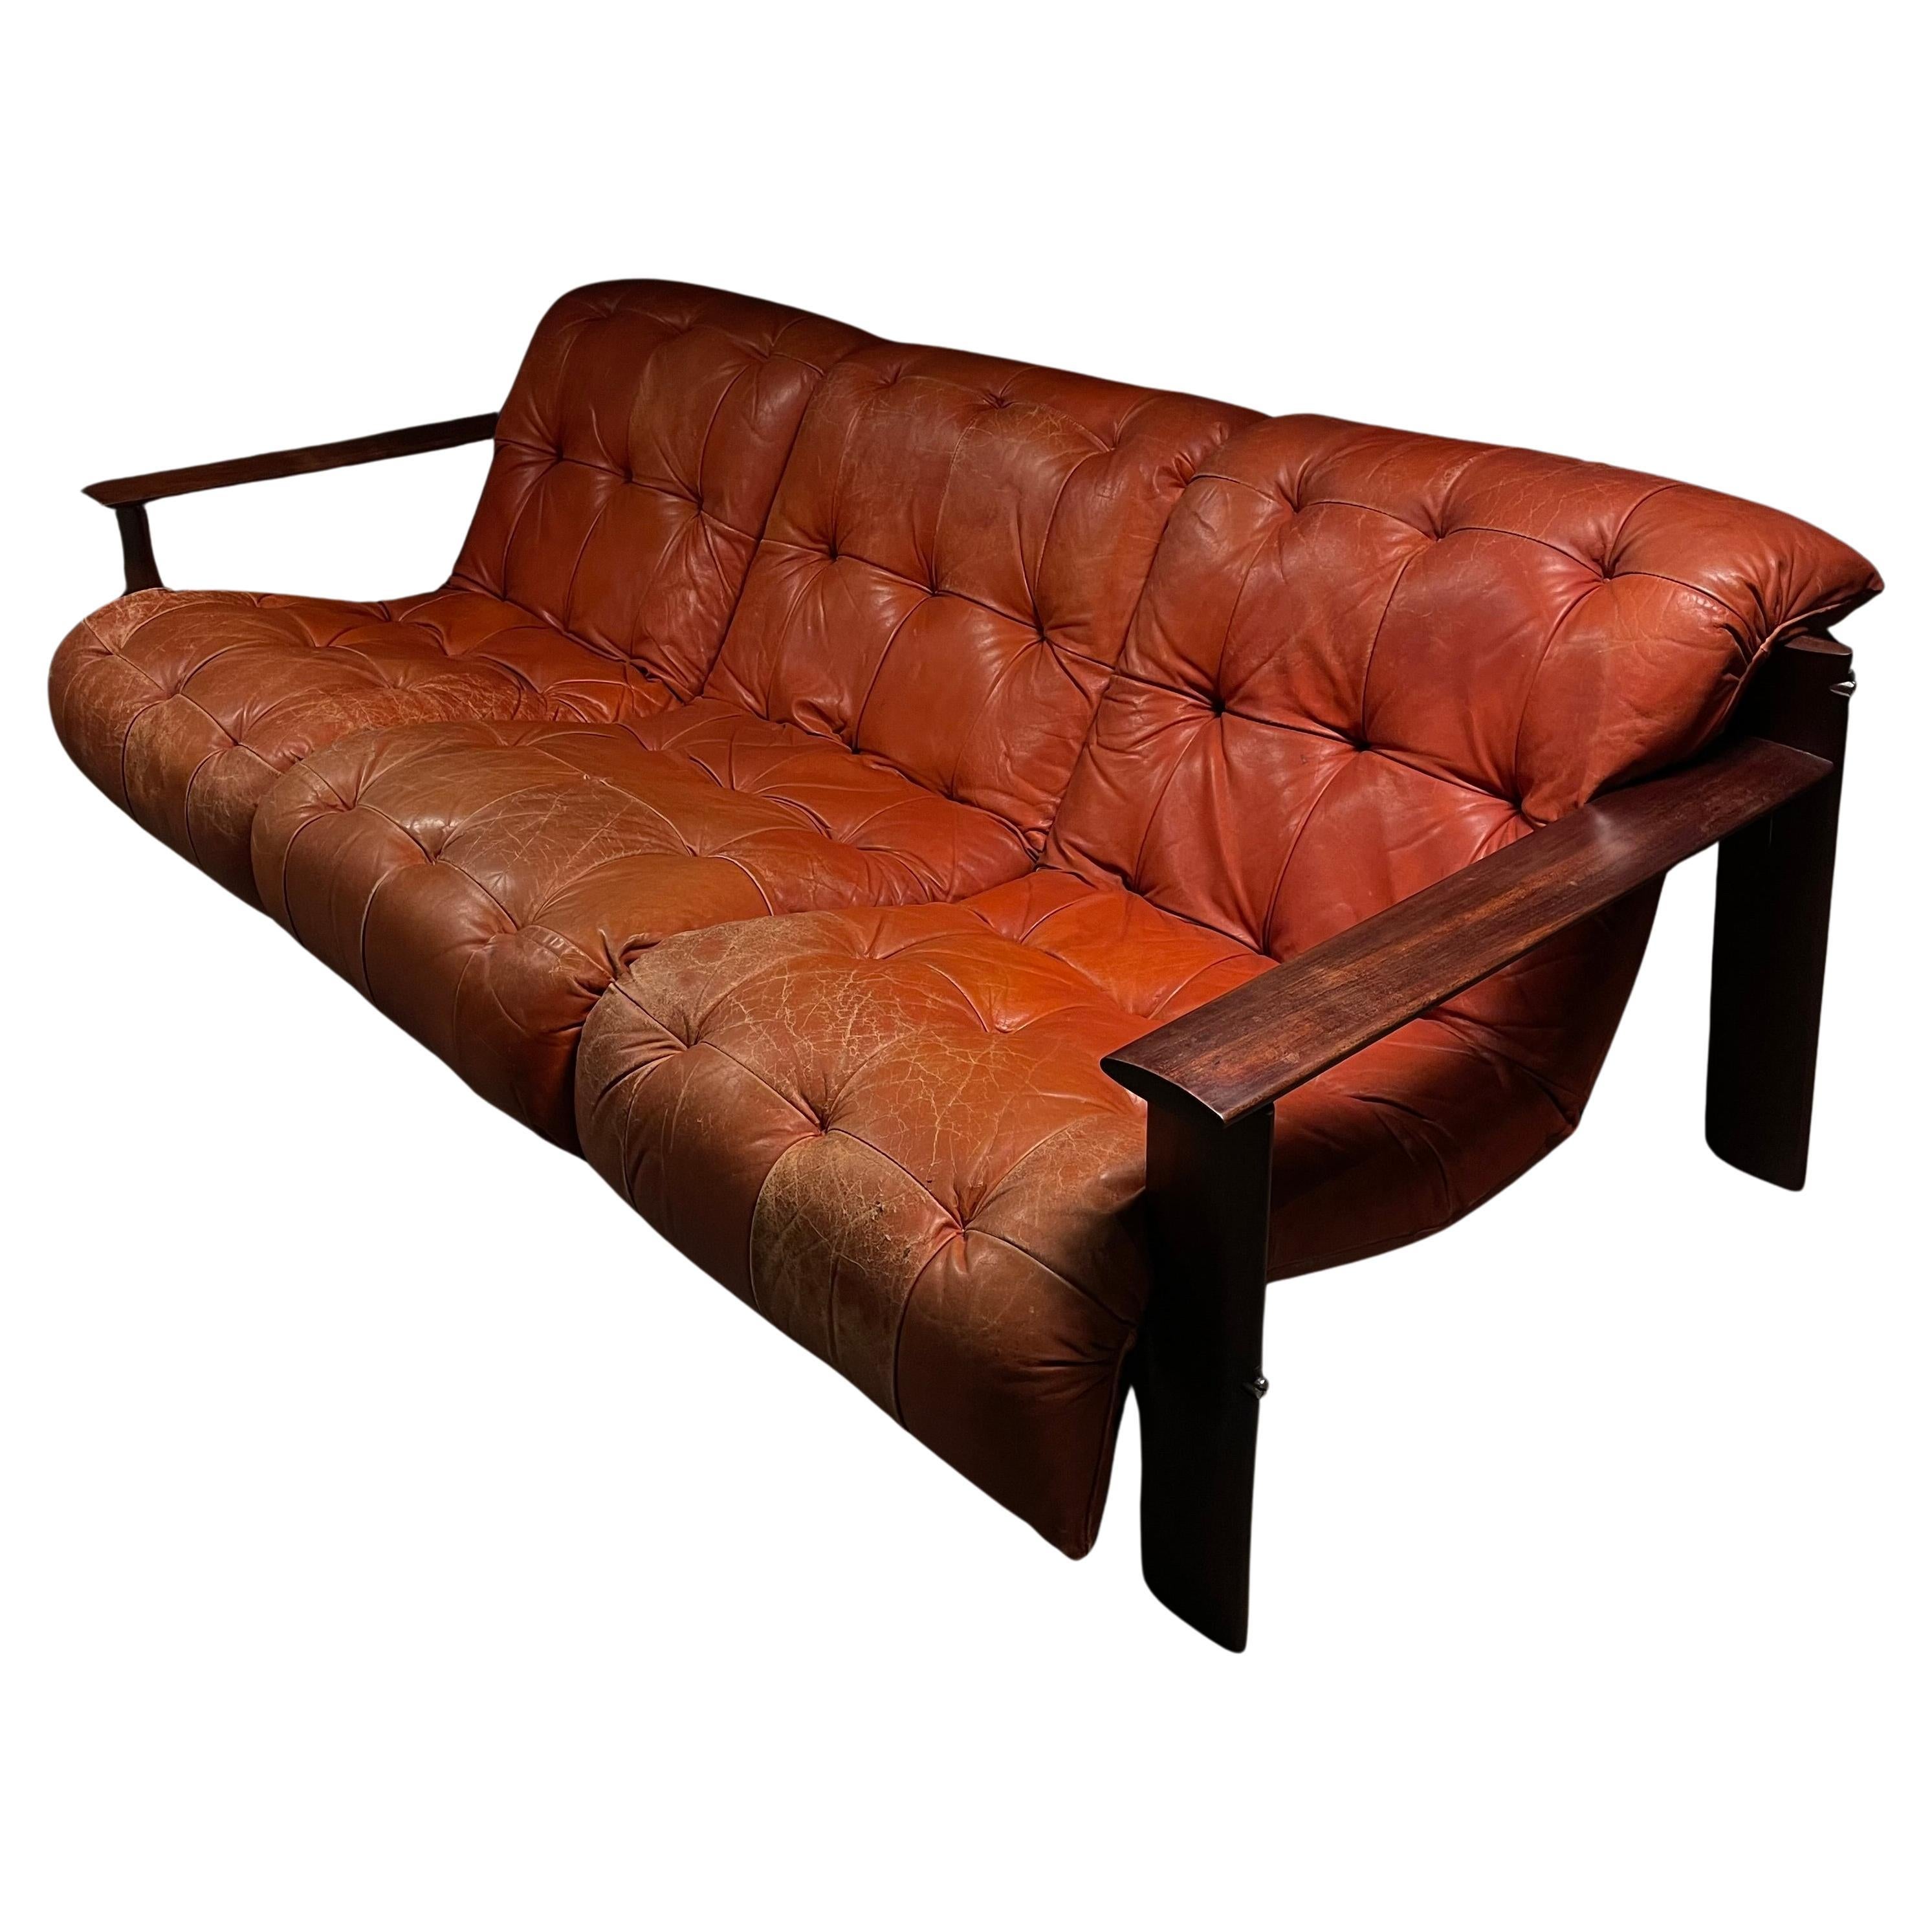 What is the most durable leather for furniture?